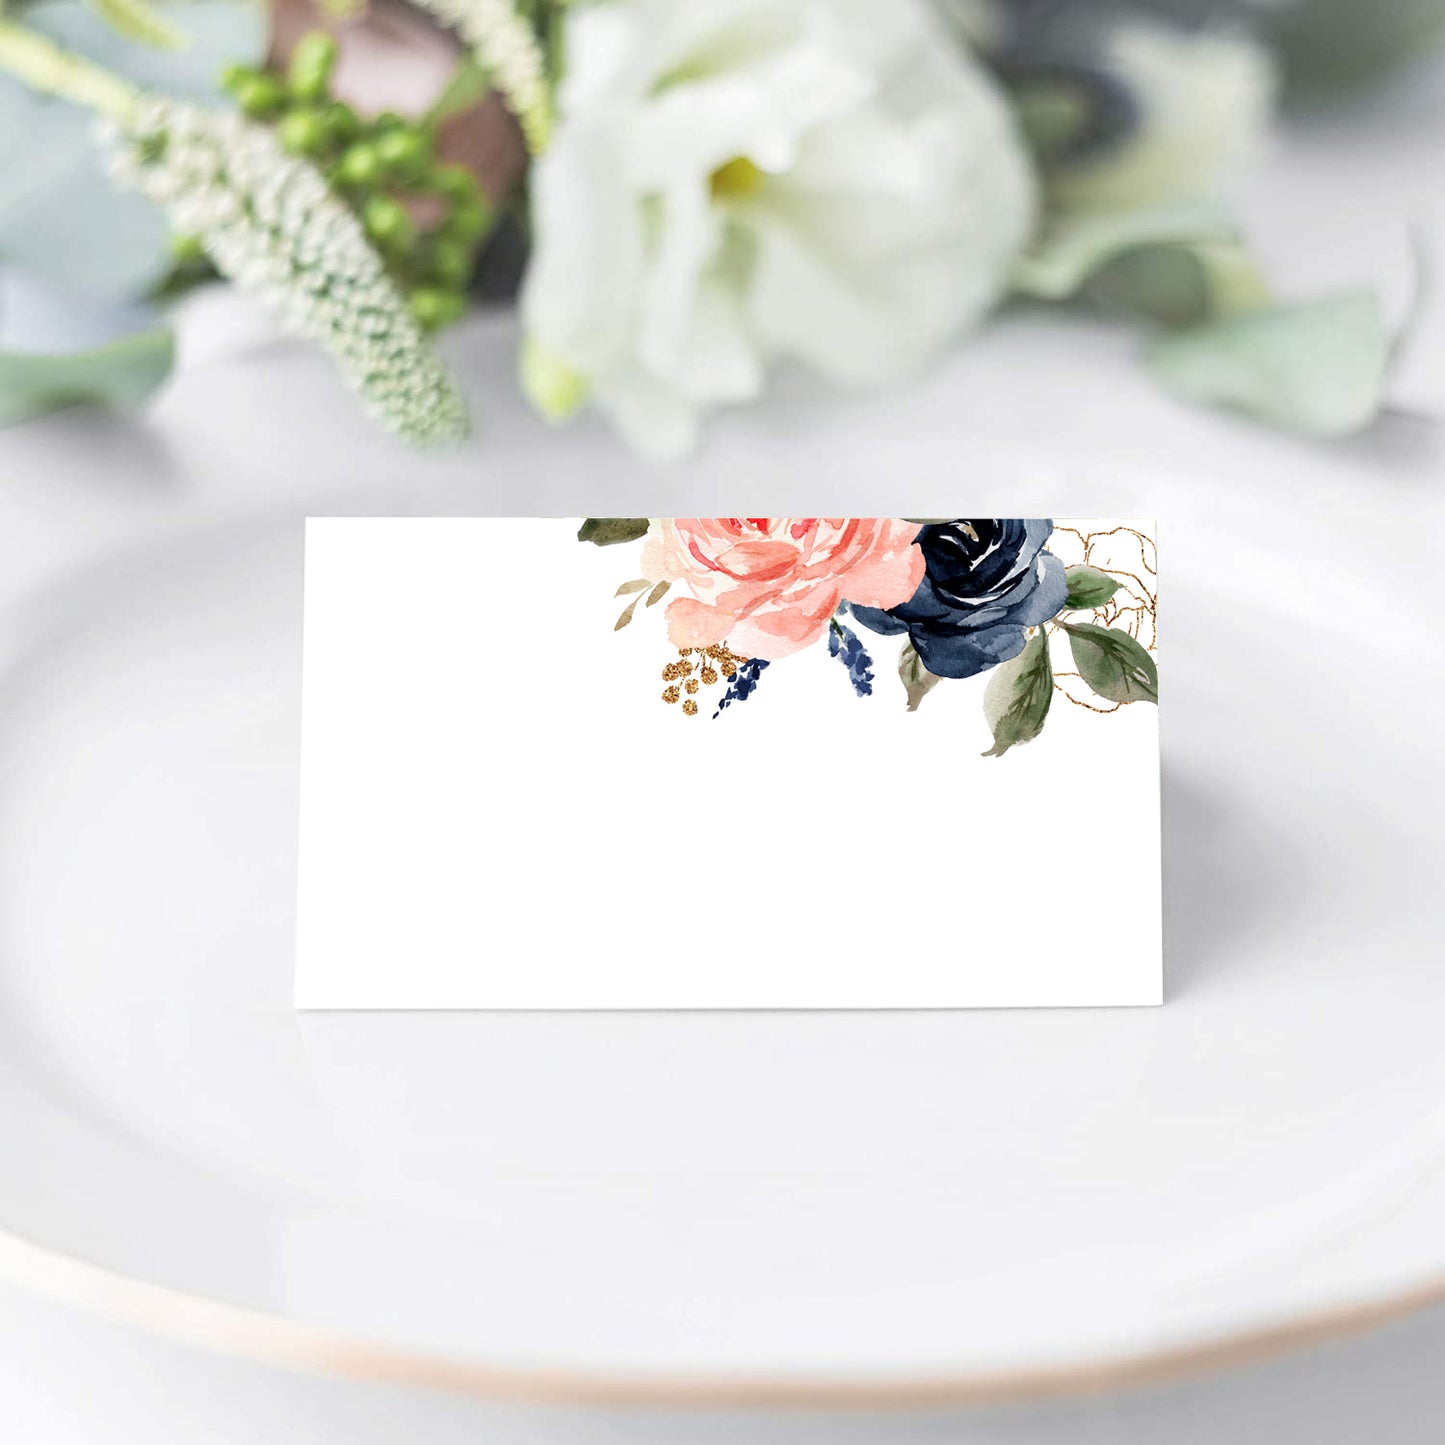 Floral Place Cards for Wedding or Party, Seating Place Cards for Tables, Scored for Easy Folding, Navy Flower Design, 2 x 3.5 Inches